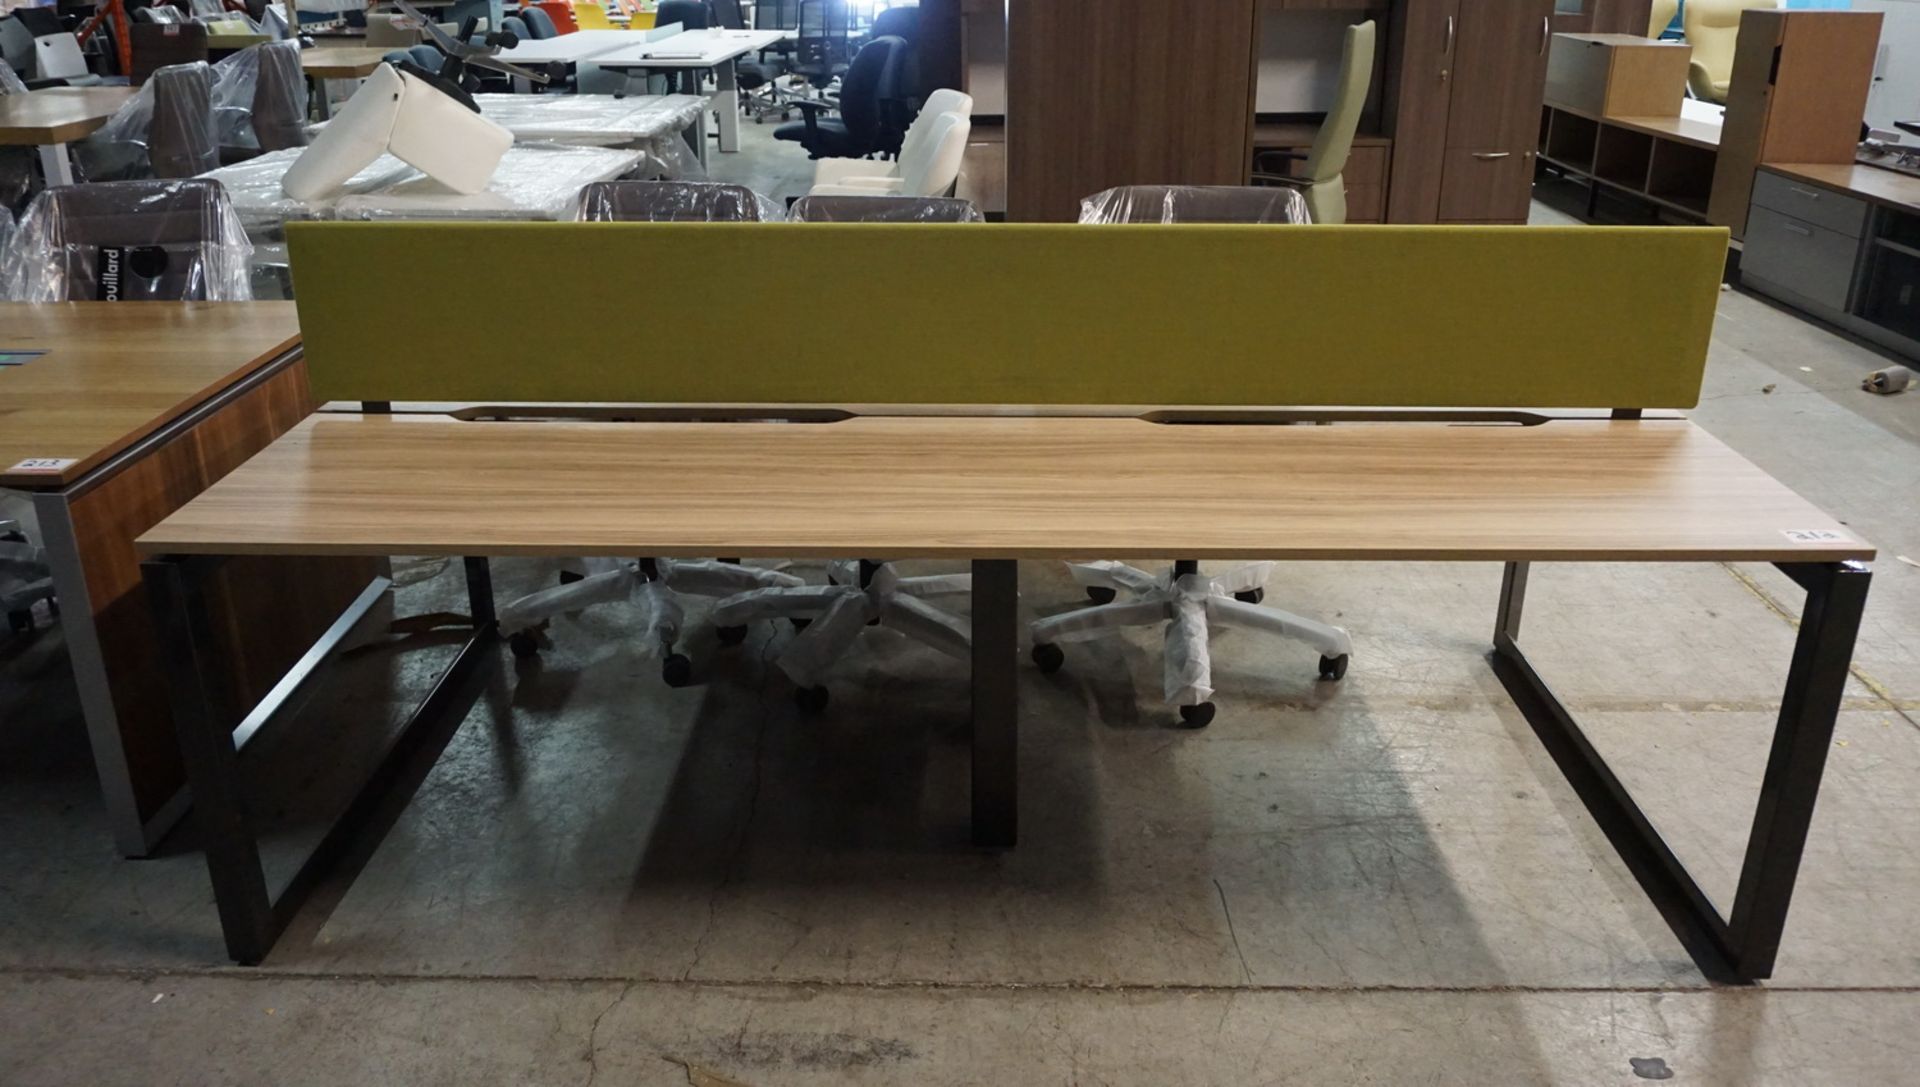 STEELCASE 14-573 4' X 8' 2-SIDED BENCH SYSTEM W/ GREEN DIVIDER